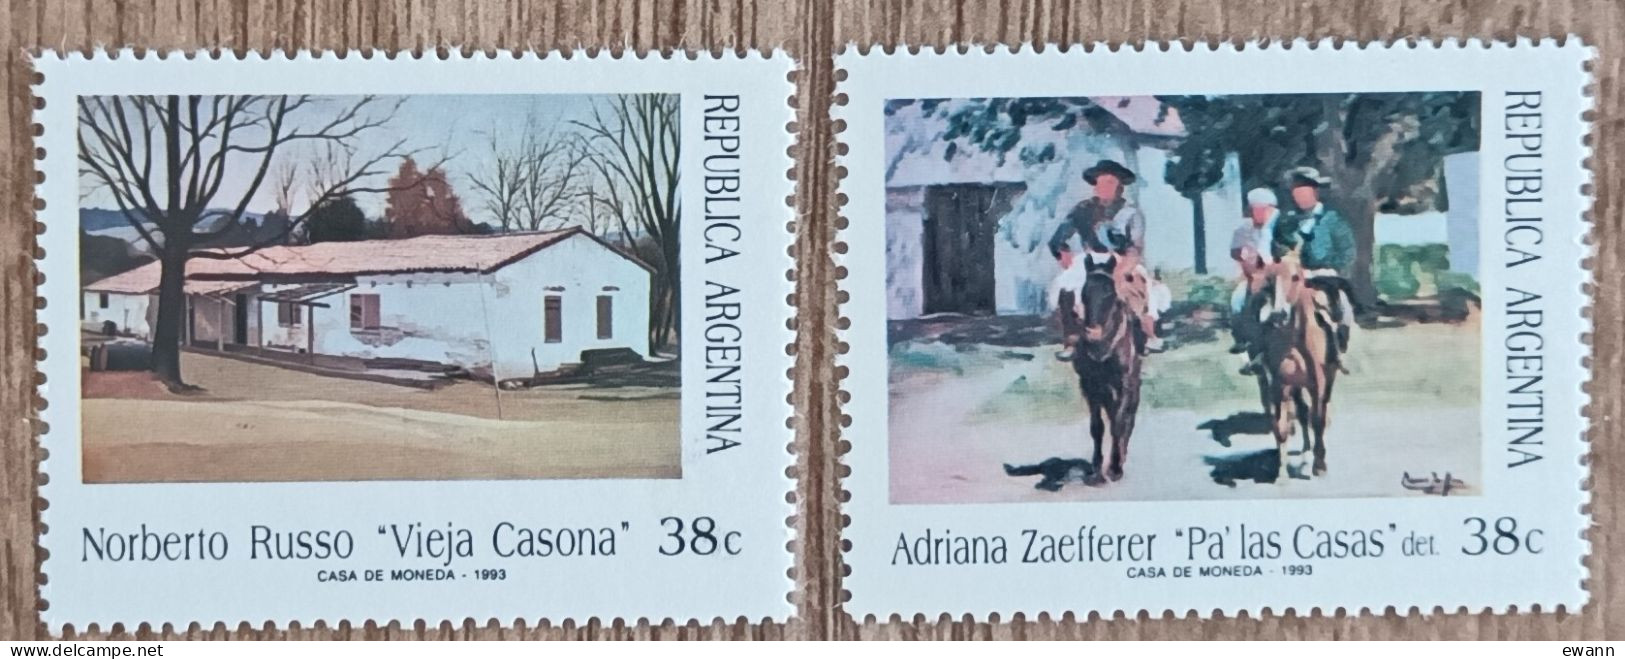 Argentine - YT N°1821, 1822 - Tableaux / Norberto Russo / Adriana Zacfferer - 1993 - Neuf - Unused Stamps